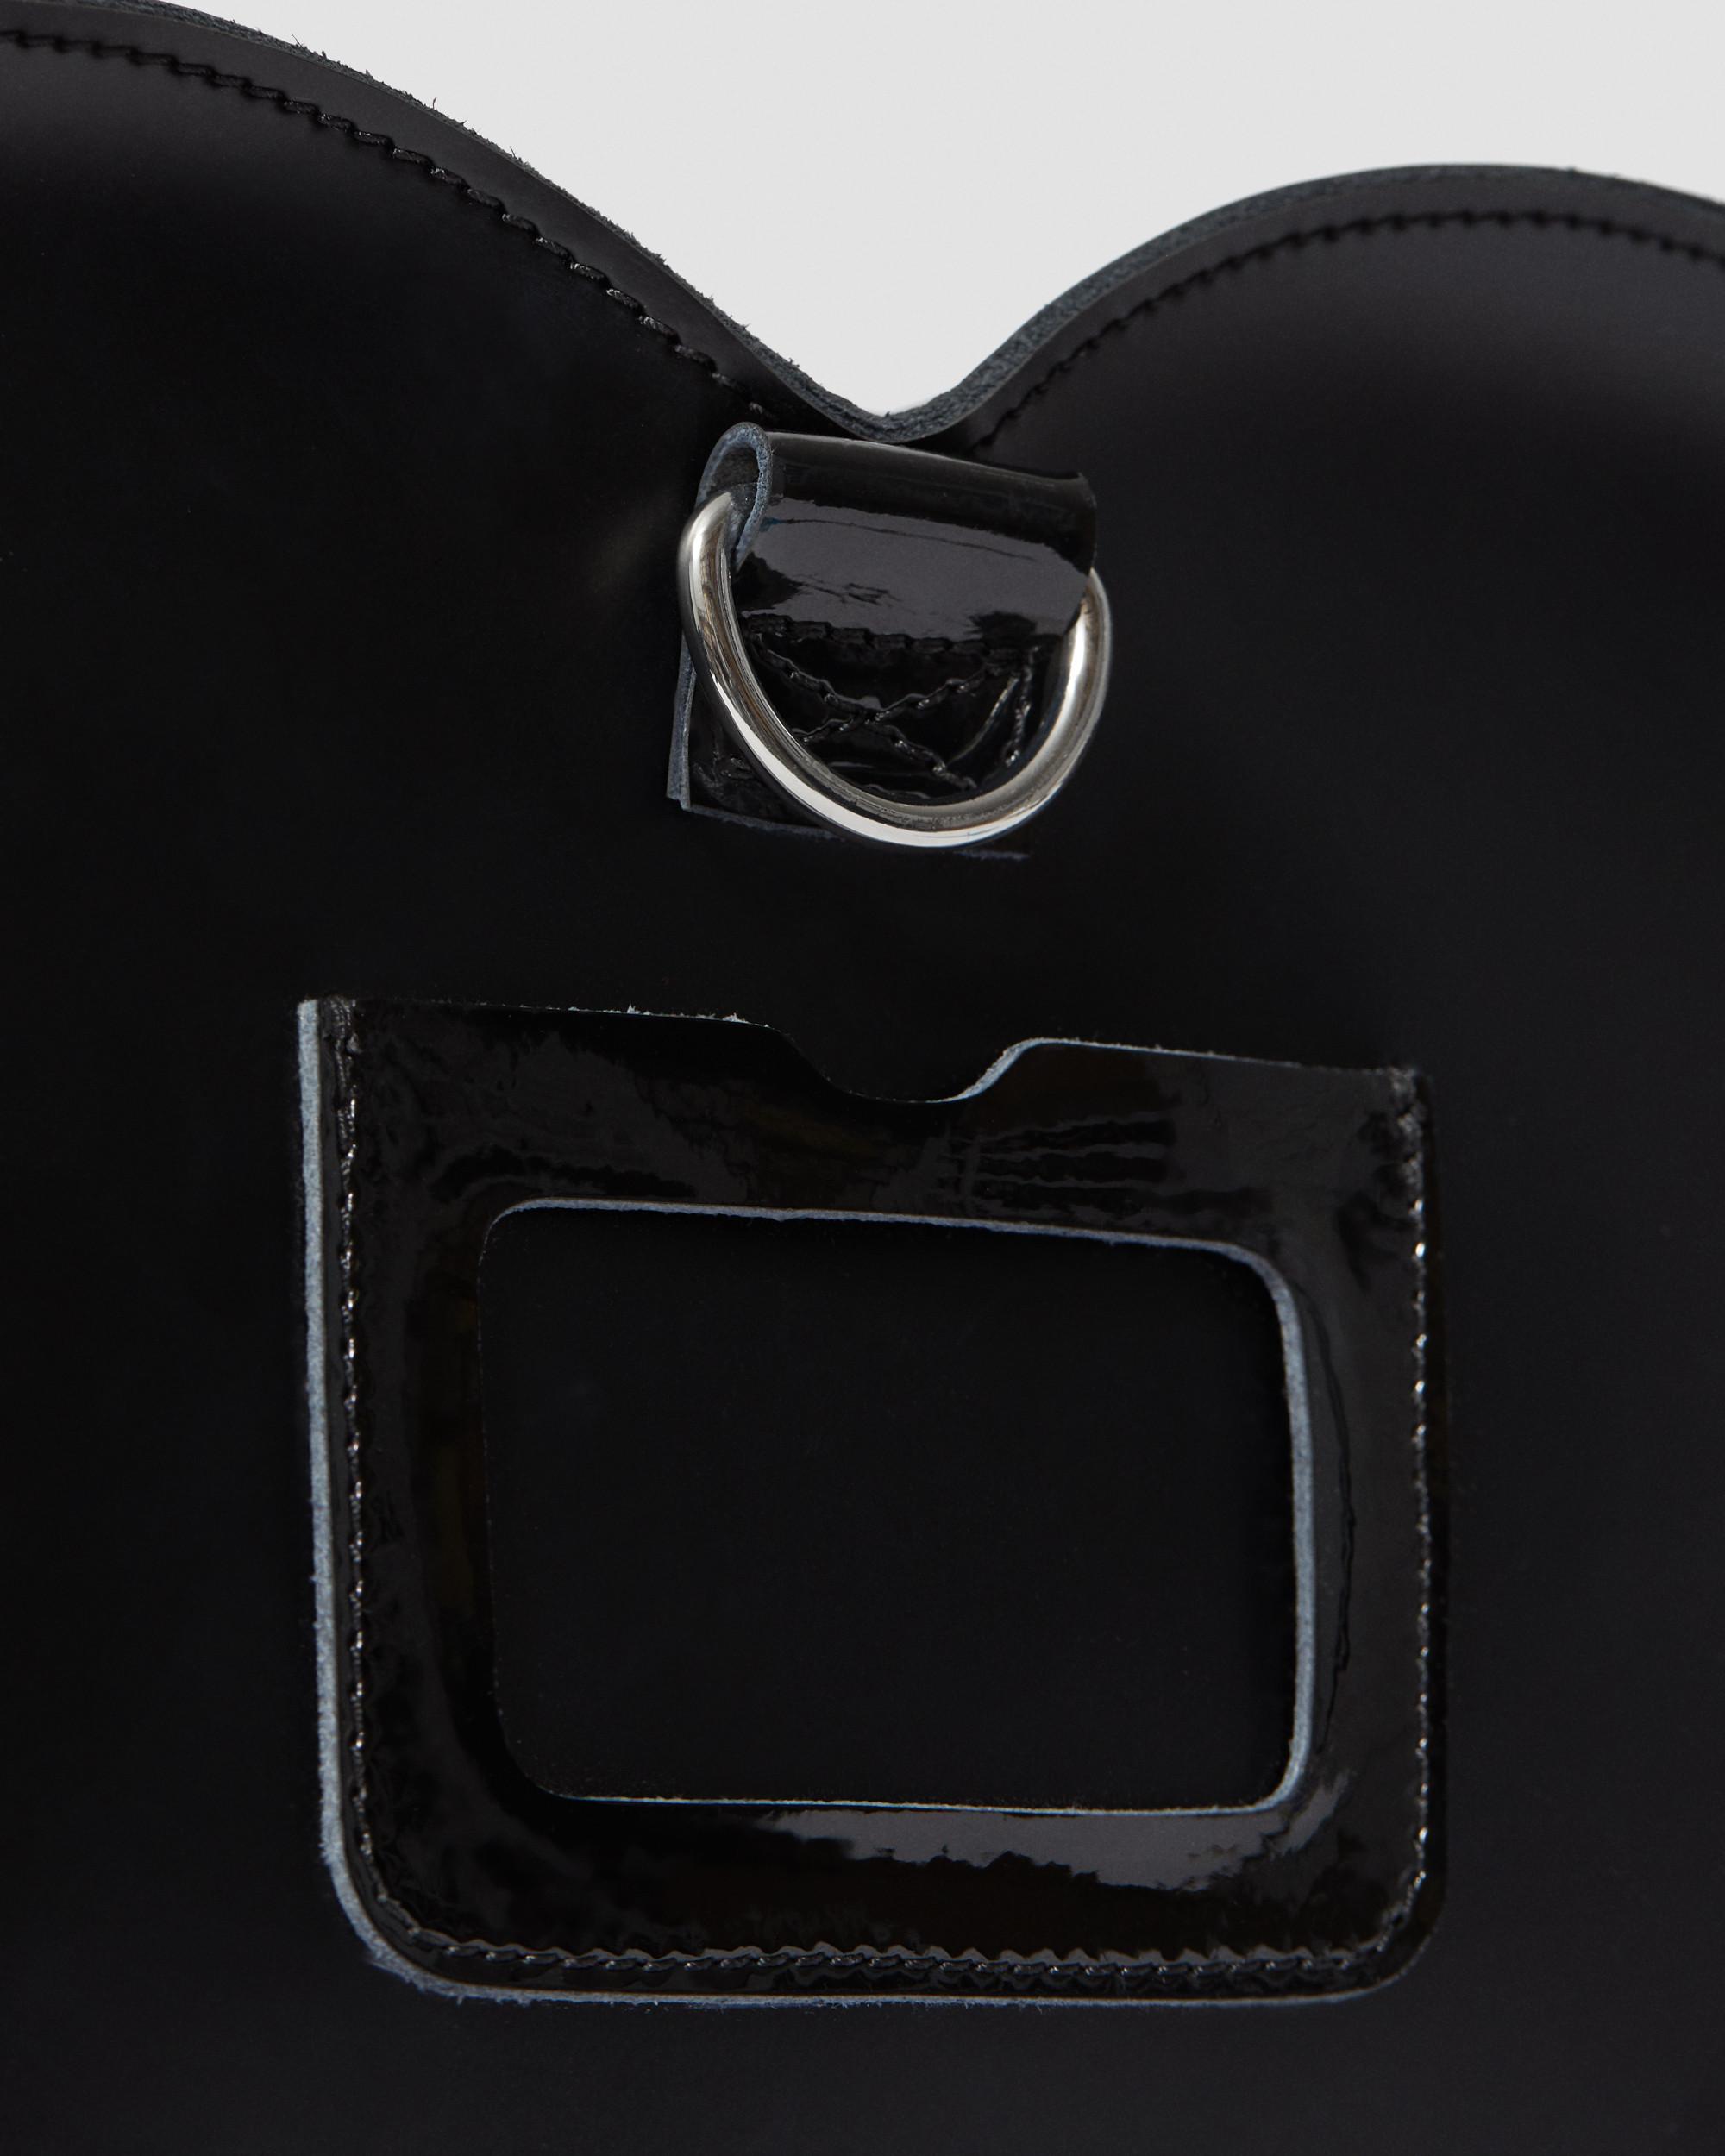 Dr. Martens Heart Shaped Ruffle Leather Backpack in Black